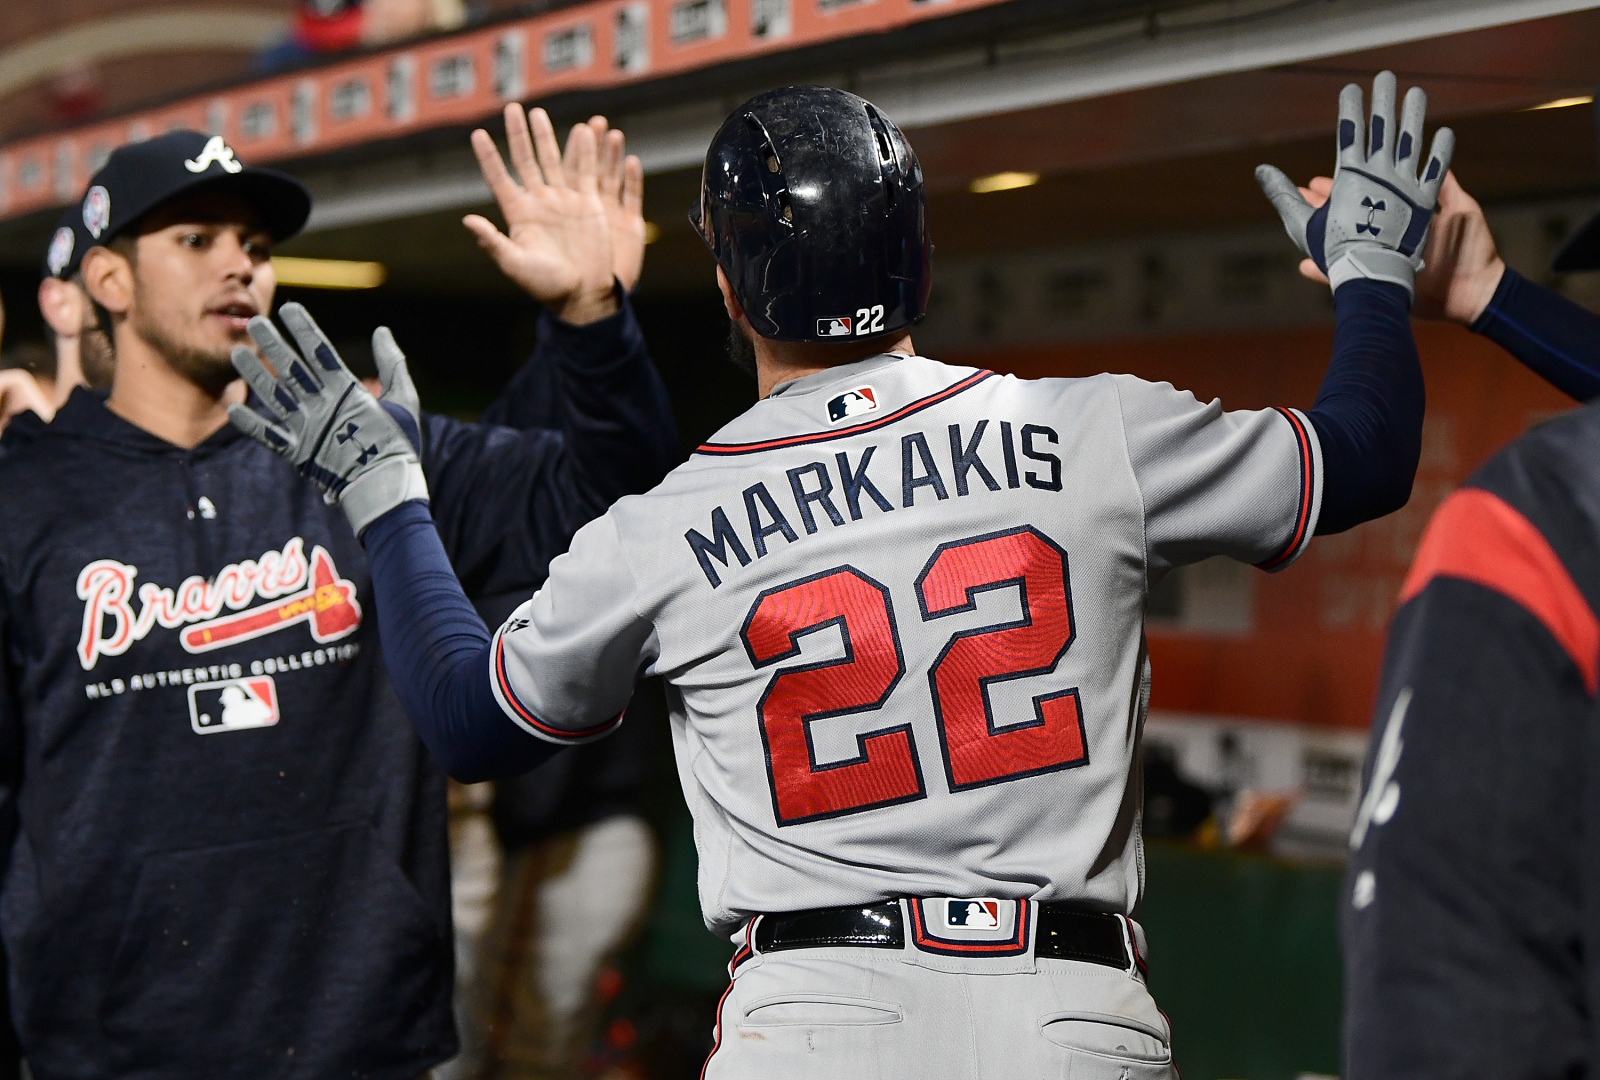 Braves' Markakis gets a rare rest day